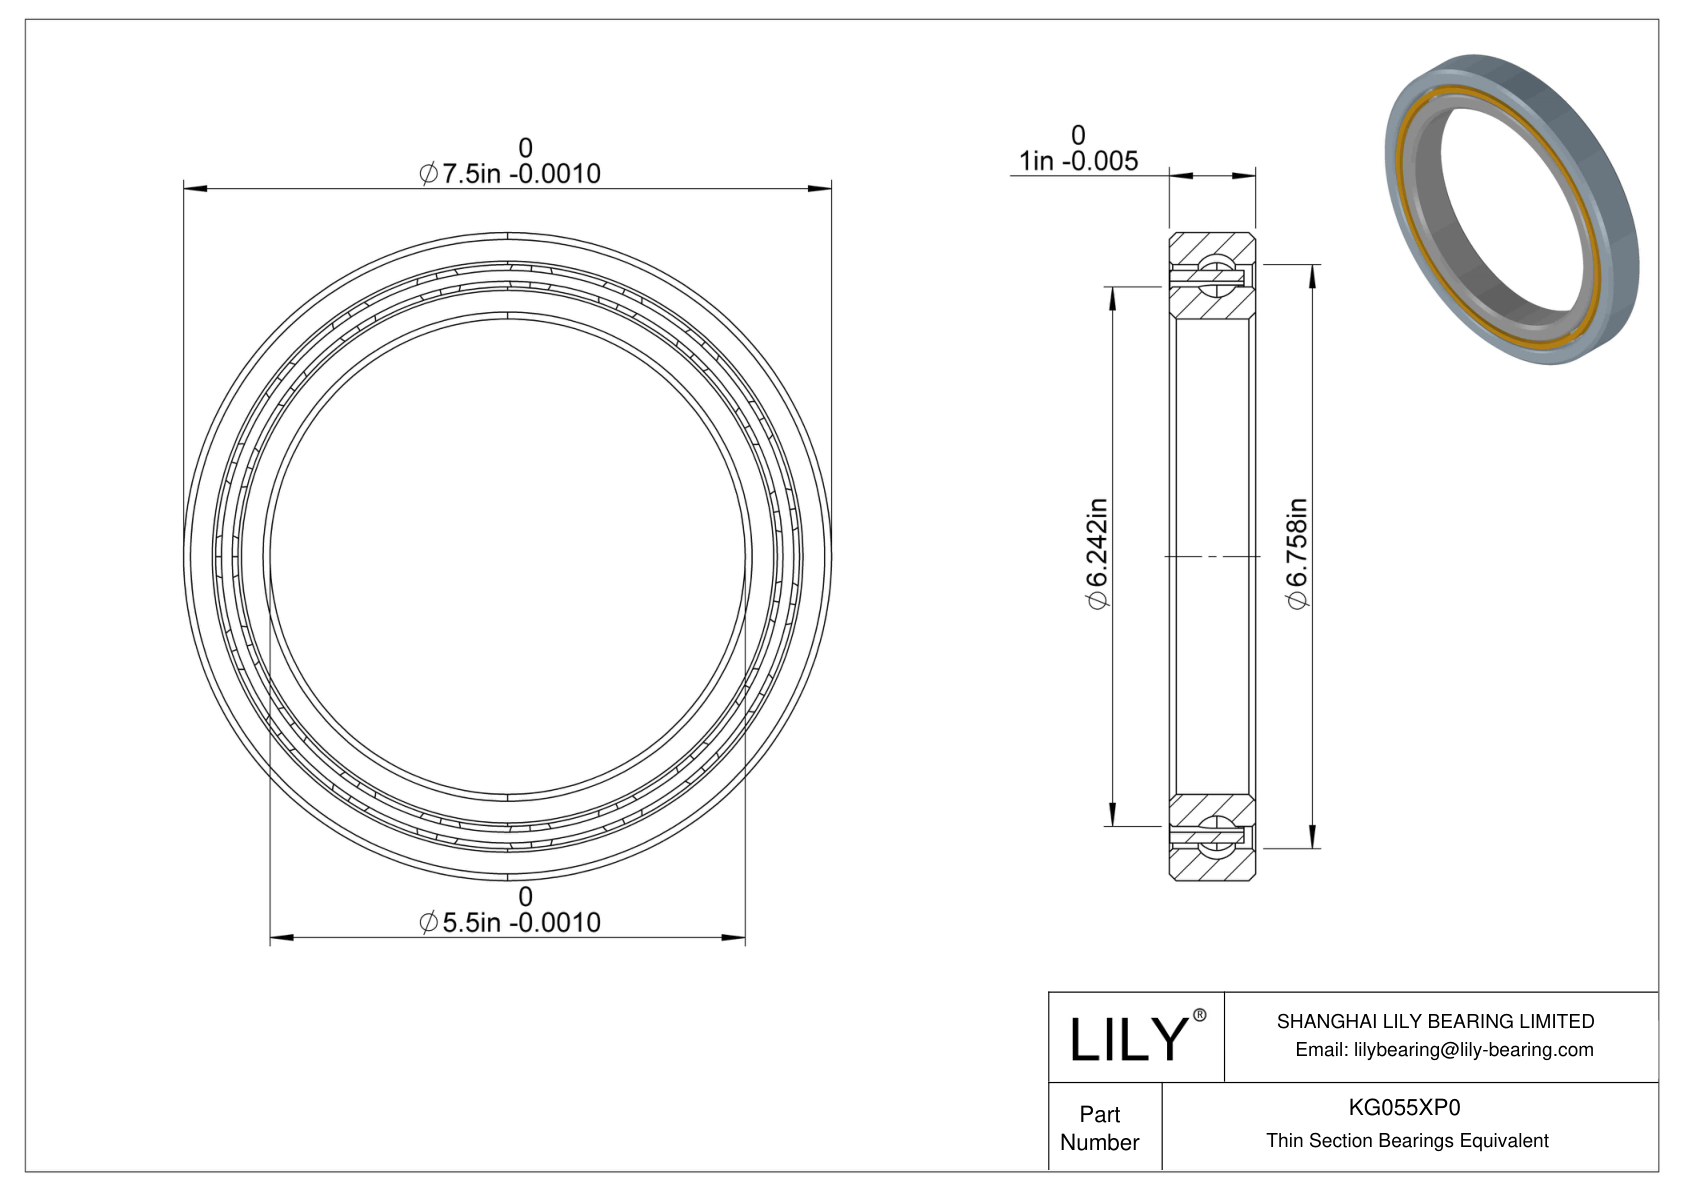 KG055XP0 Constant Section (CS) Bearings cad drawing